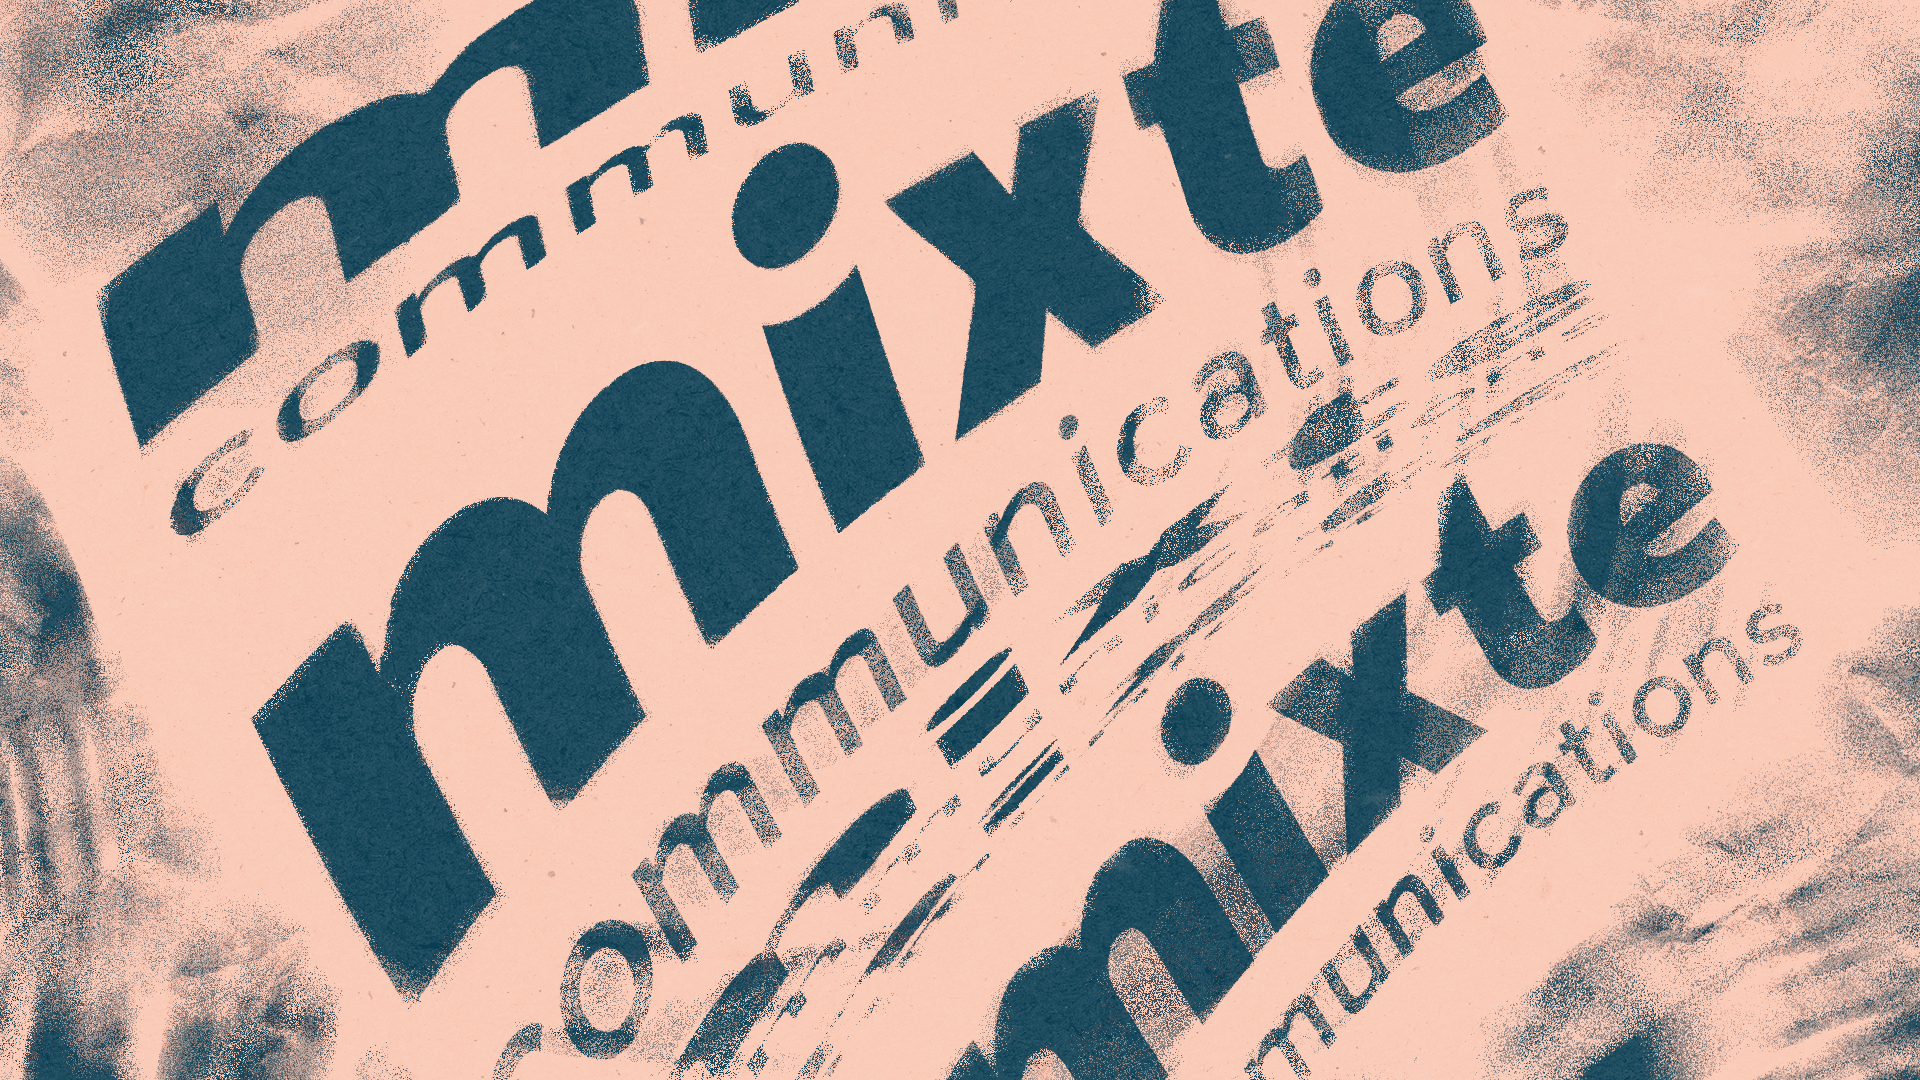 Mixte Communications logo repeated and distorted